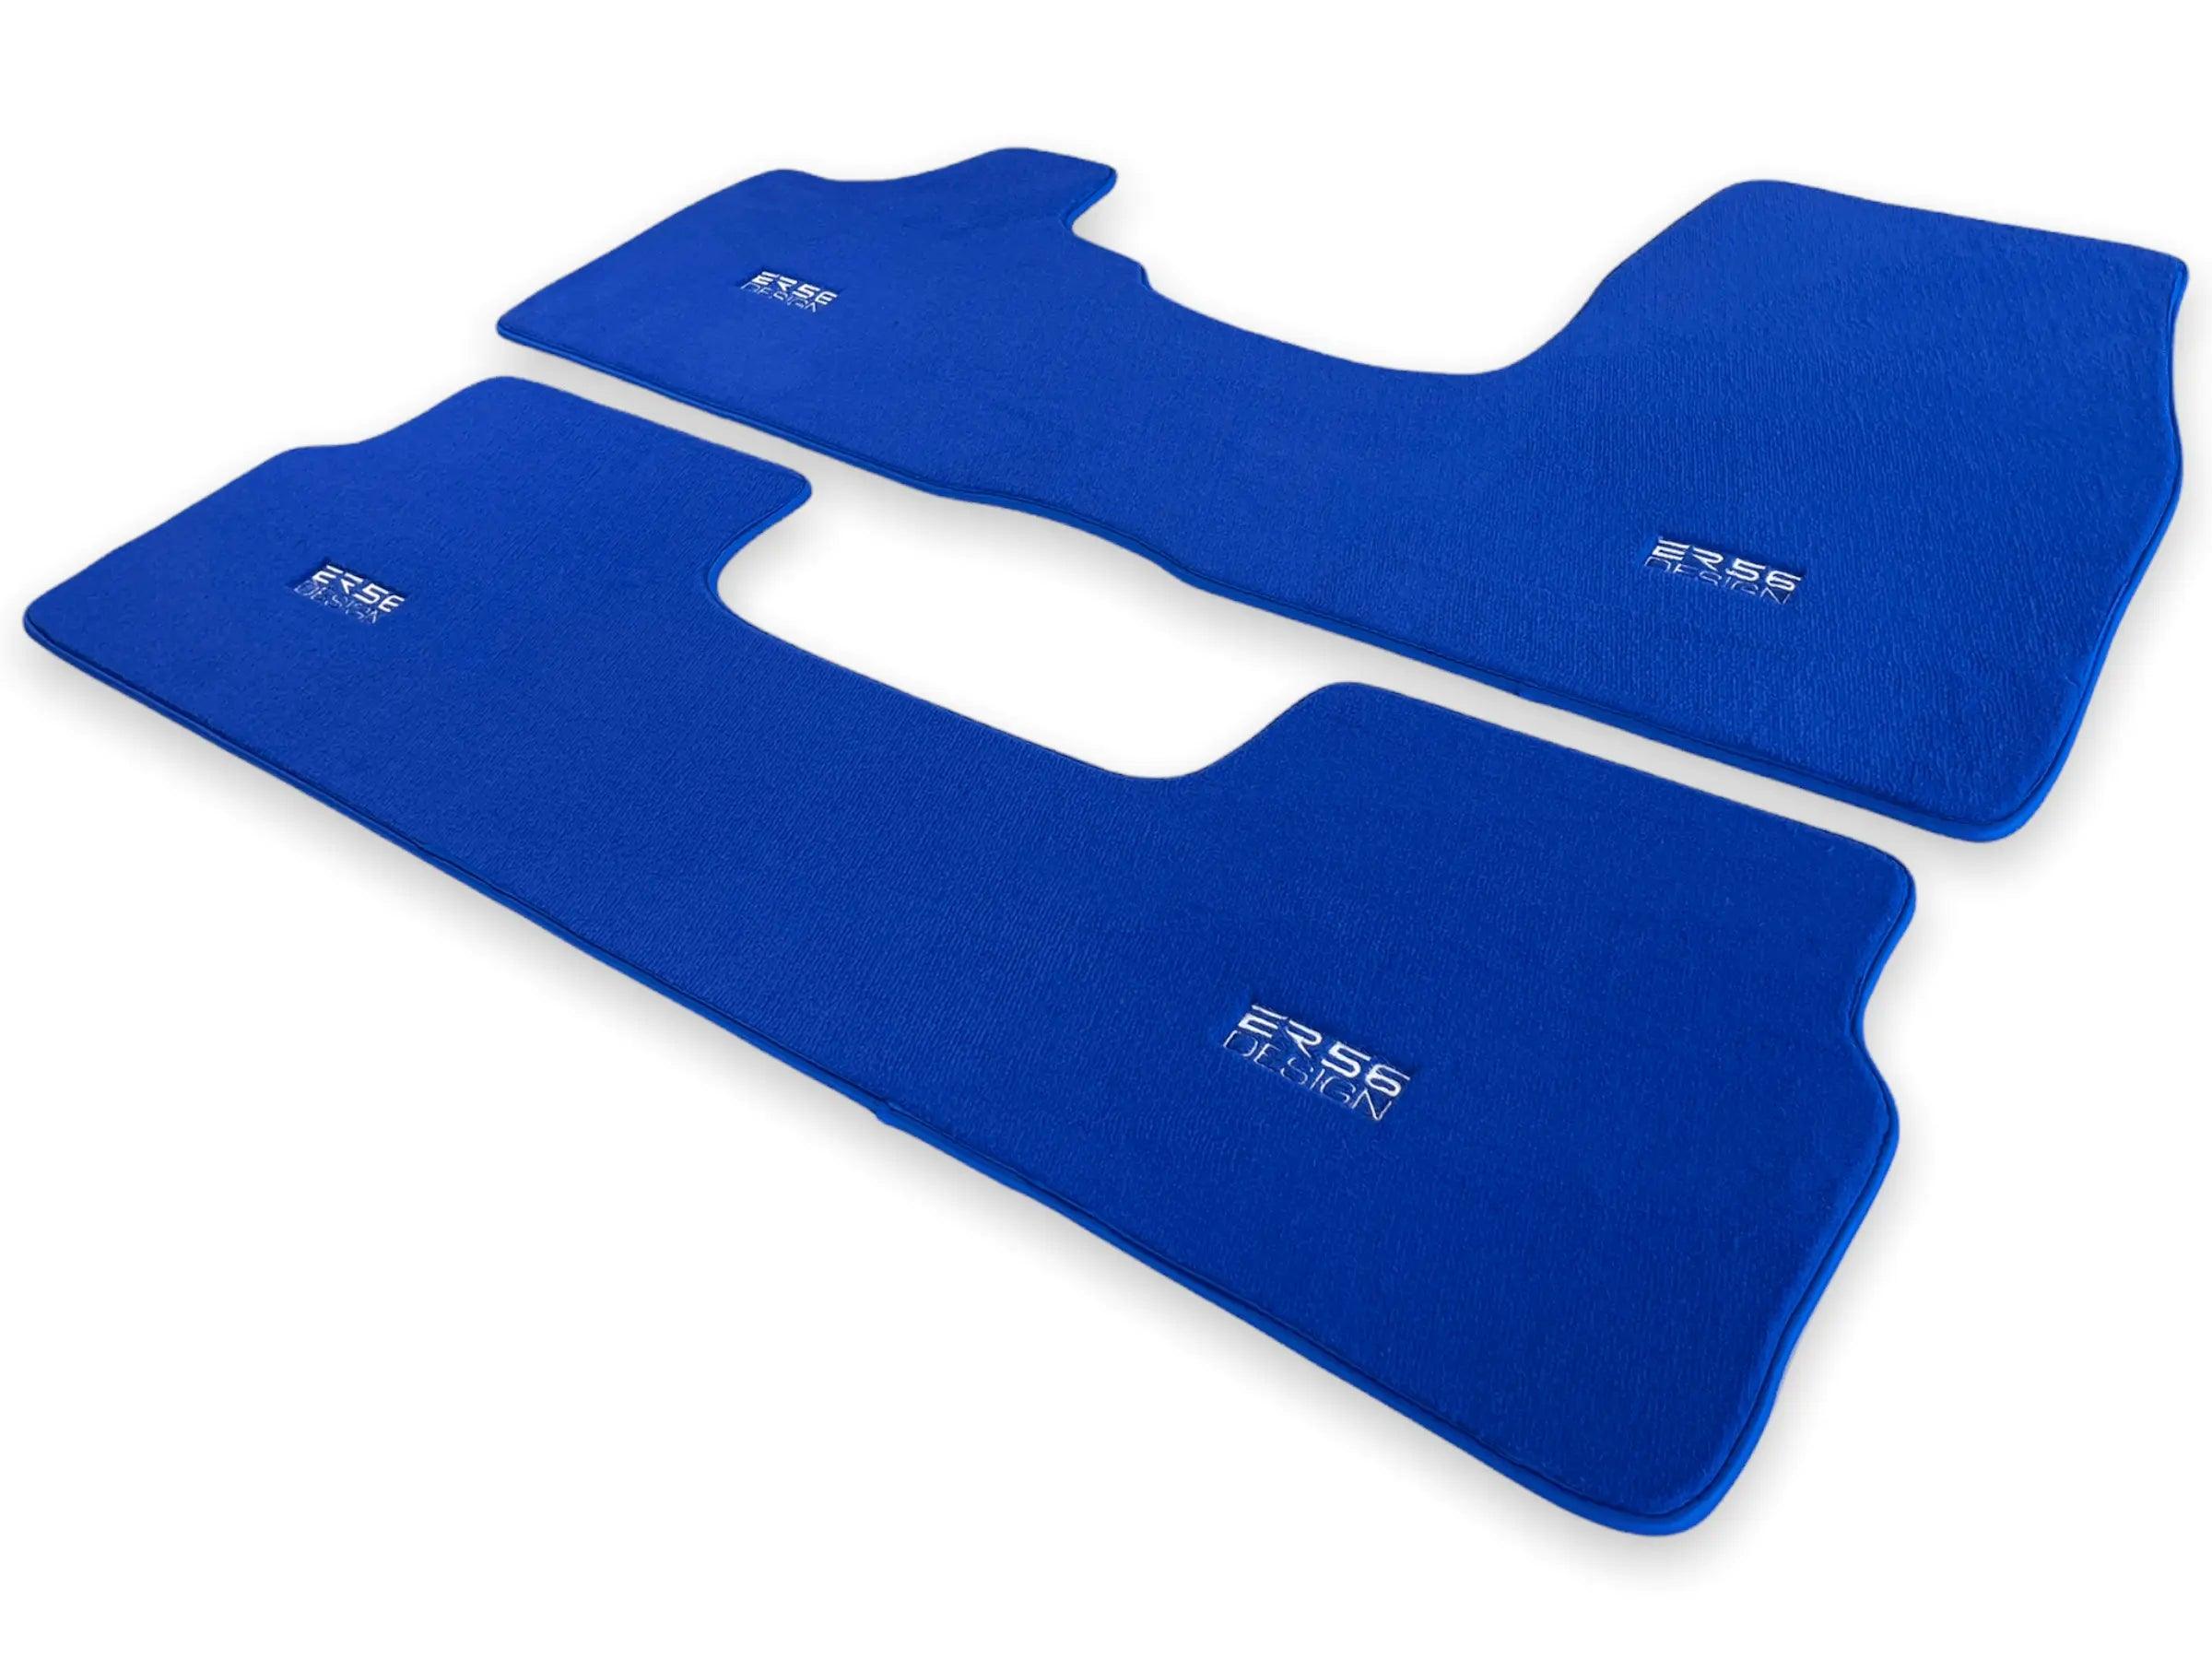 Blue Floor Mats For BMW i3 Series I01 With M Package Er56 Design Brand - AutoWin